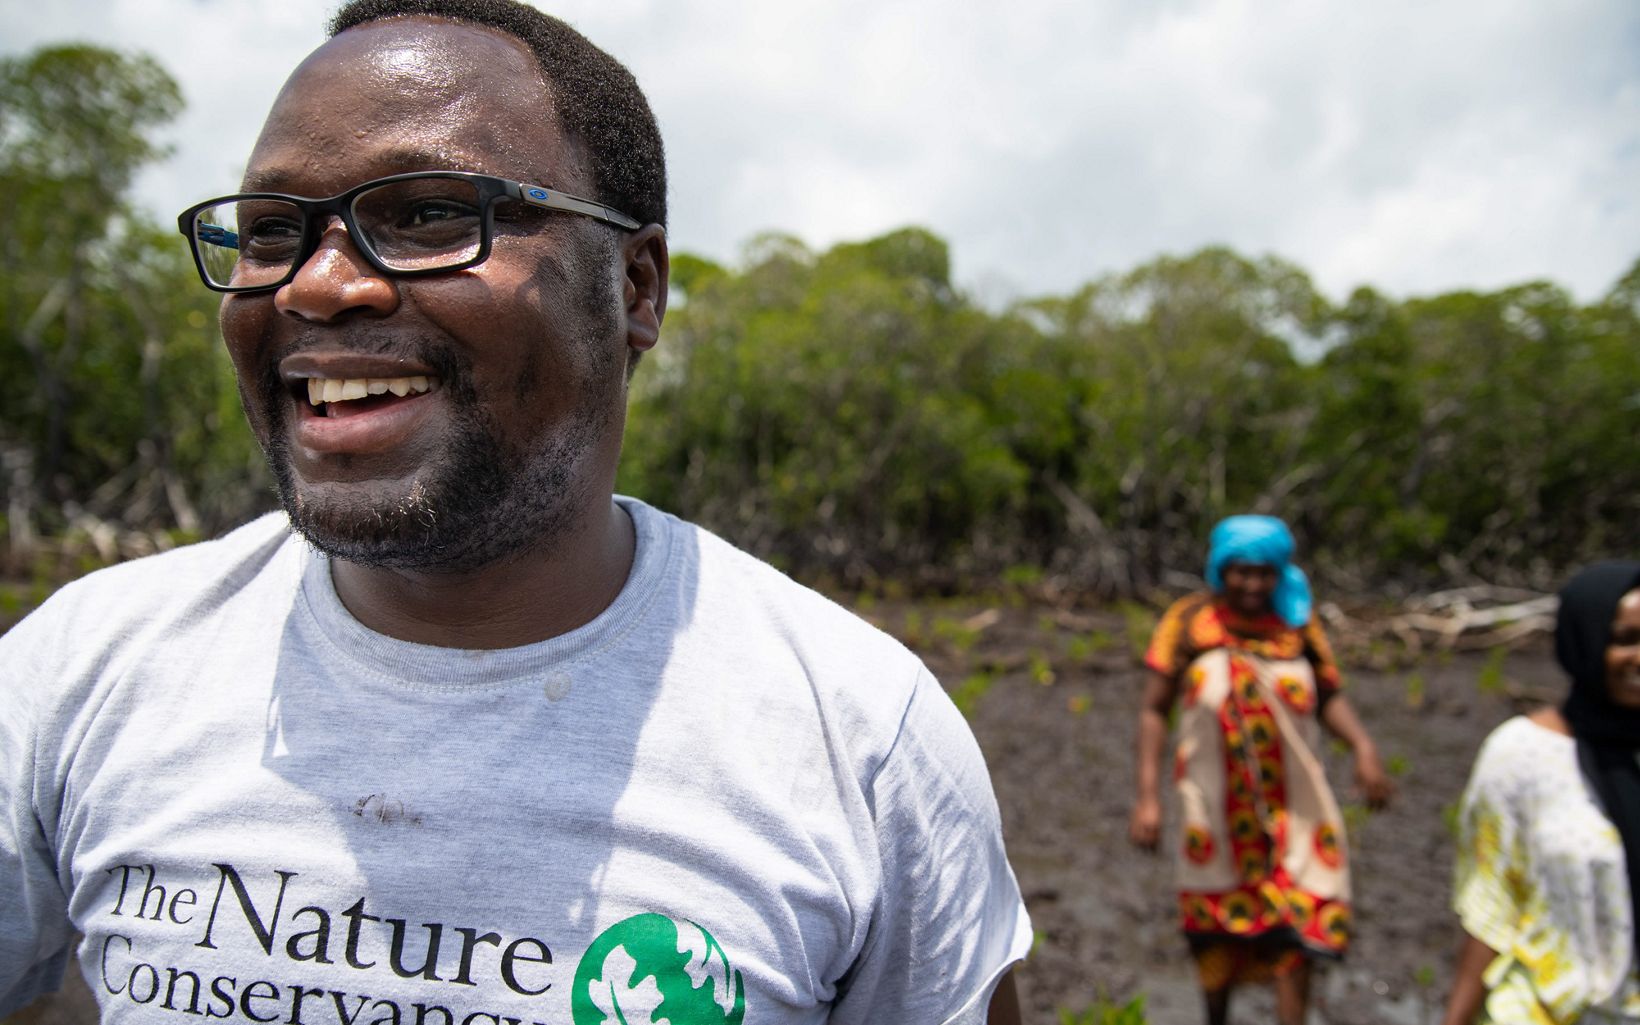 TNC Africa Fisheries Strategy Manager George Maina leads a mangrove restoration project in Lamu, Kenya. "Mangroves are the tropical rainforests of the ocean," George says. 

